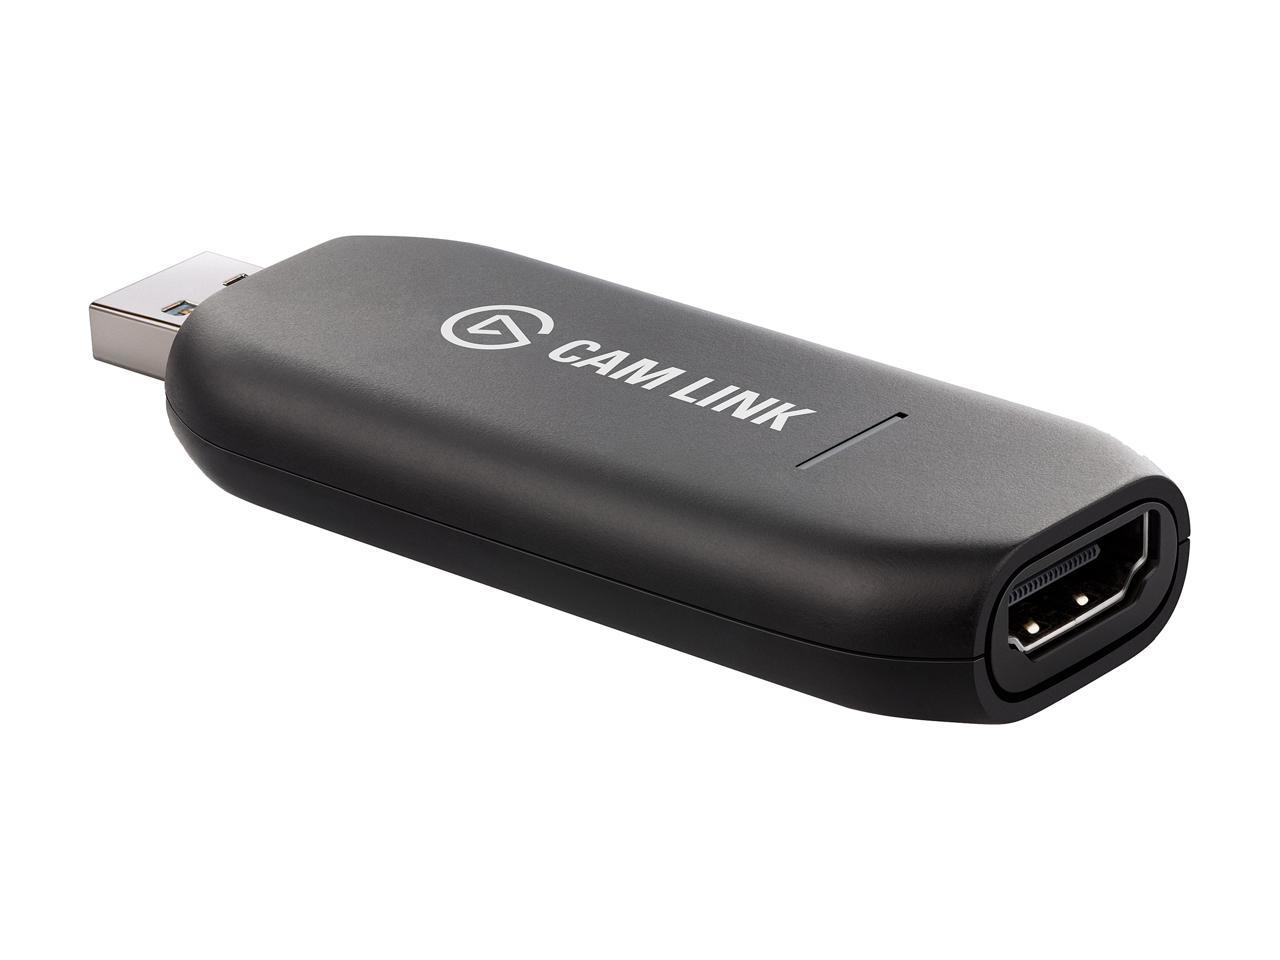 Elgato Cam Link 4K - HDMI to USB 3.0 Camera Connector, Broadcast Live and Record in 1080p60 or 4K at 30 fps via a Compatible DSLR, Camcorder or Action Cam - image 3 of 5